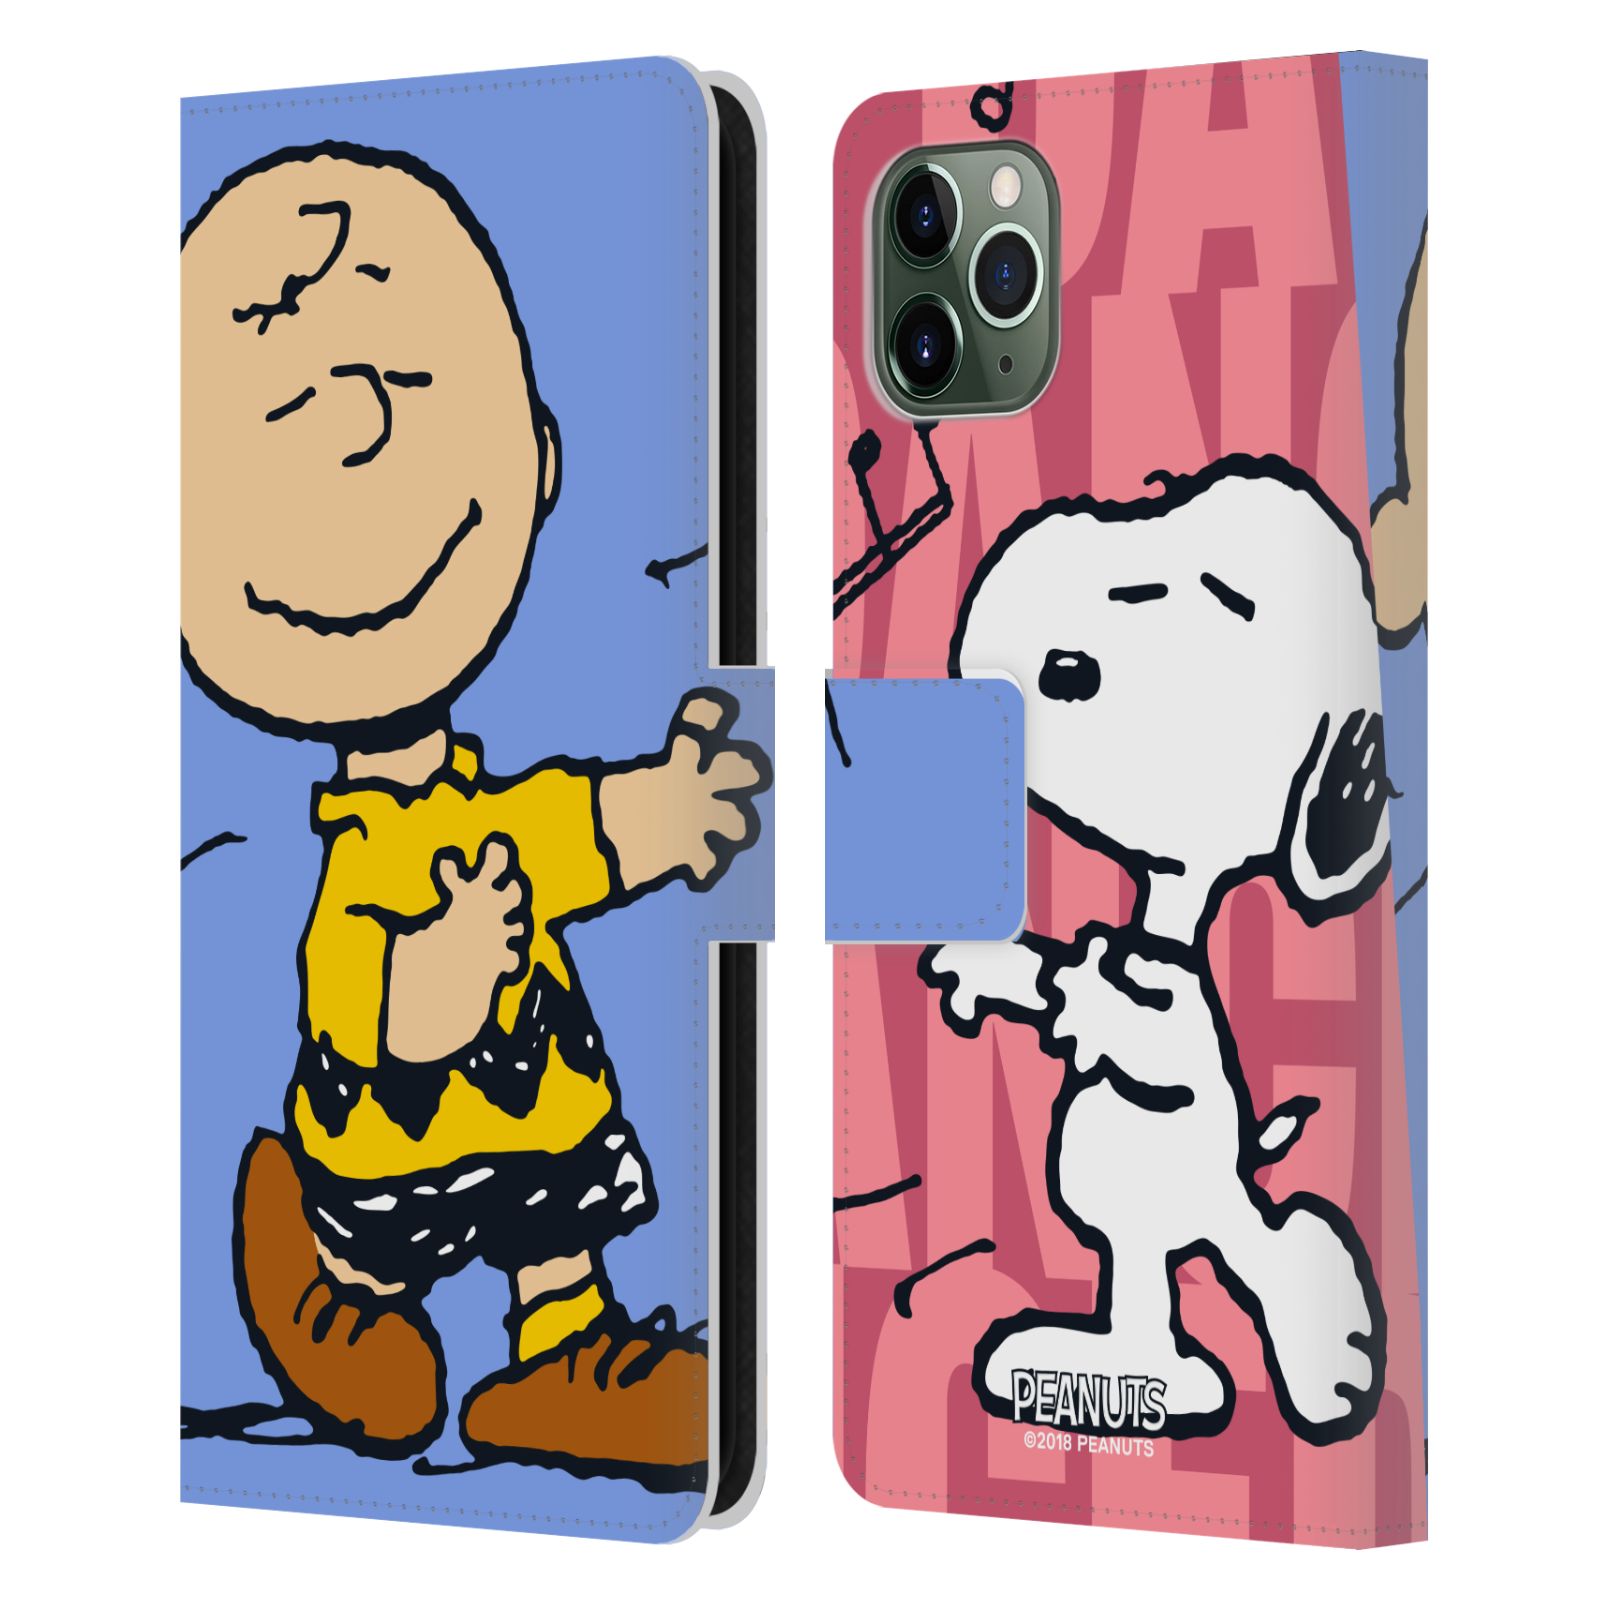 Pouzdro na mobil Apple Iphone 11 PRO MAX - Head Case - Peanuts - Snoopy a Charlie